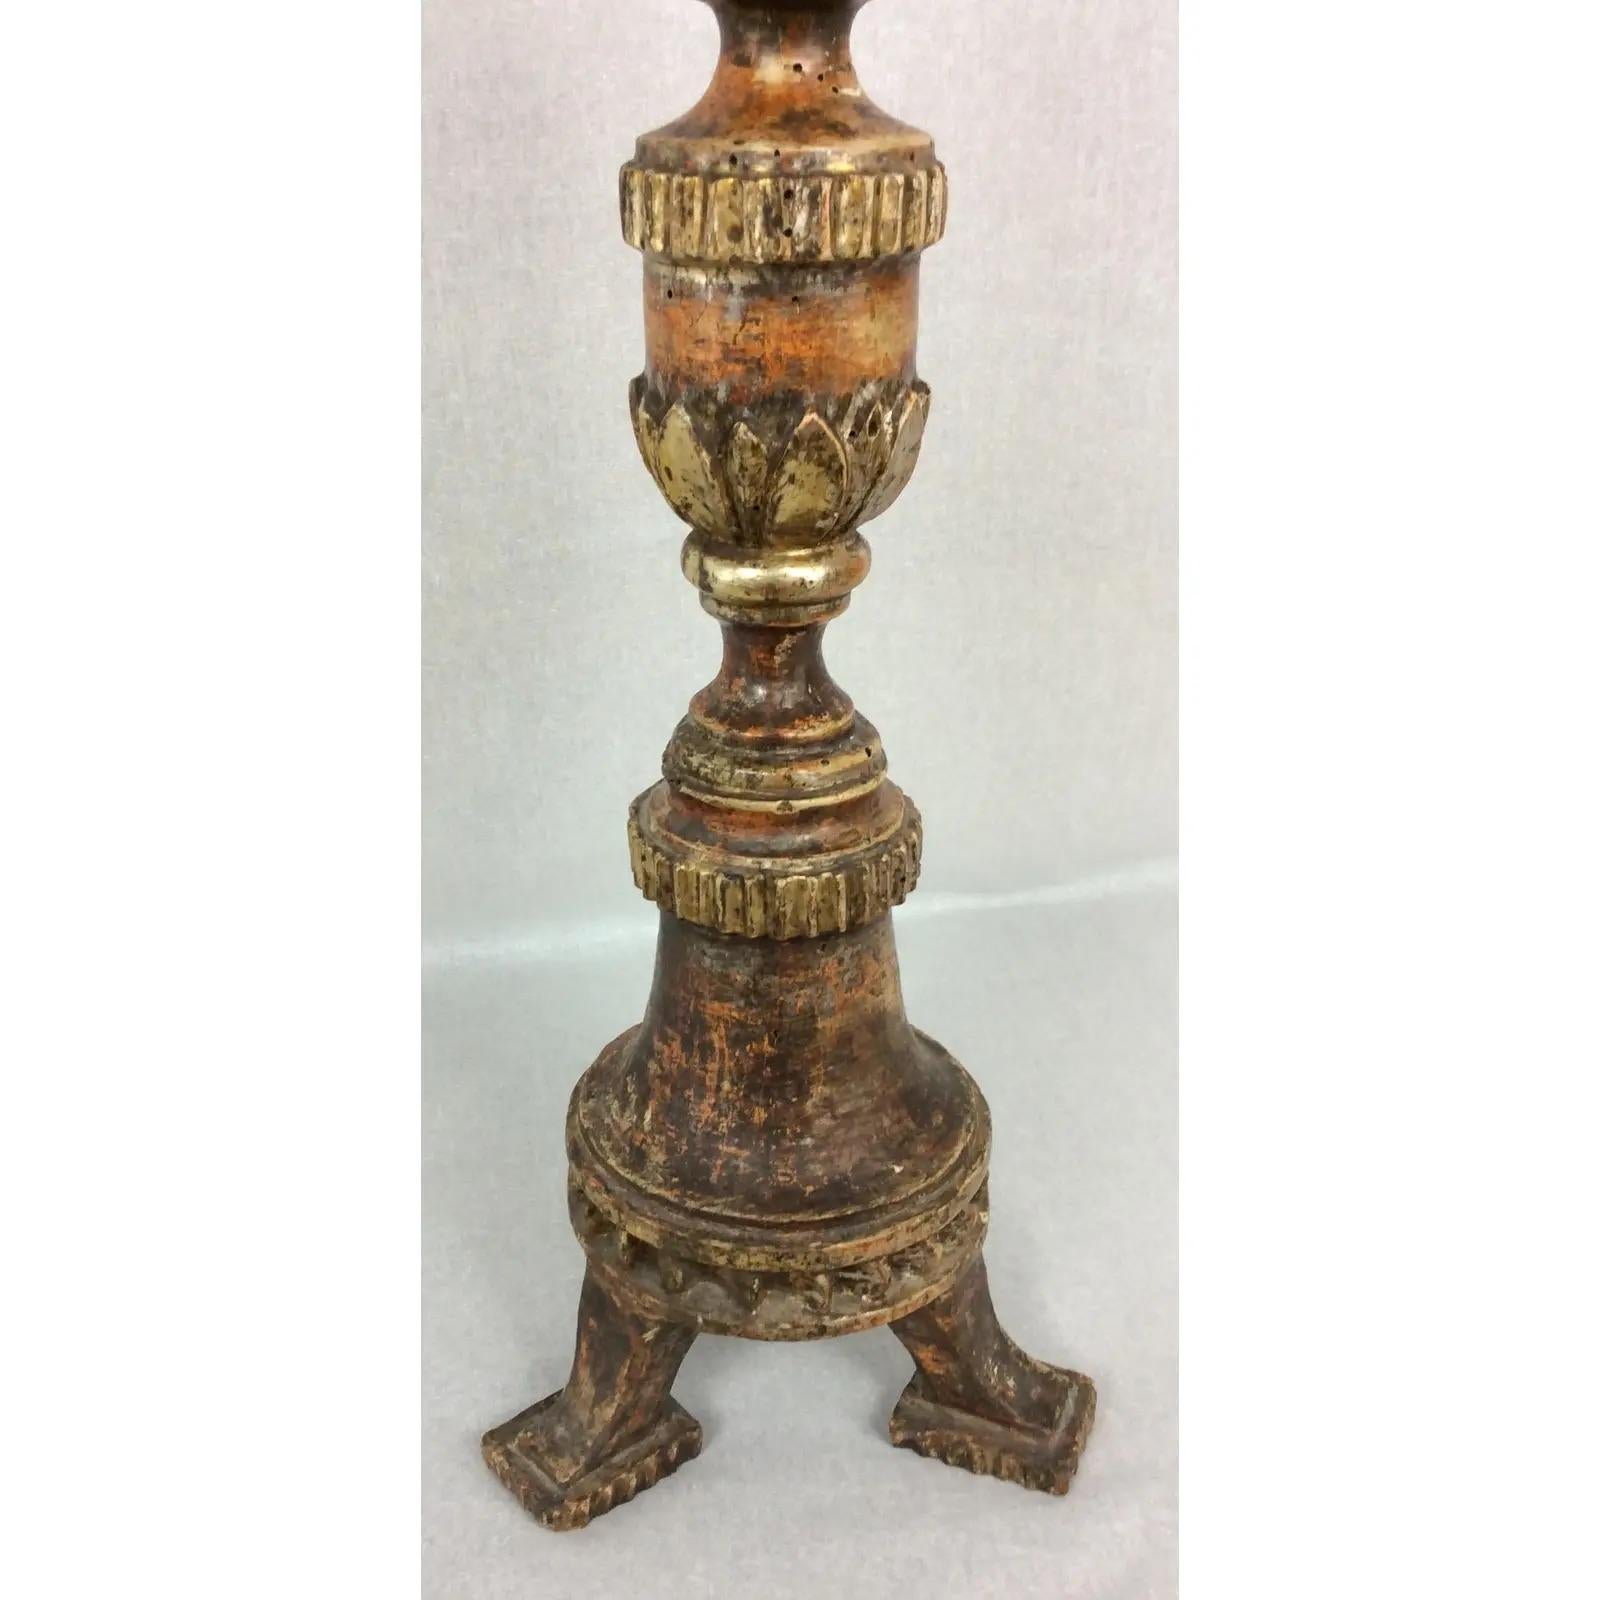 Fine 18th Century Venetian candle stand or spike, hand-carved and gilded wood. Beautiful columnar shape on a square platform base on bun feet.

This gorgeous item is very decorative and will enhance any space whether used as a light fixture or its